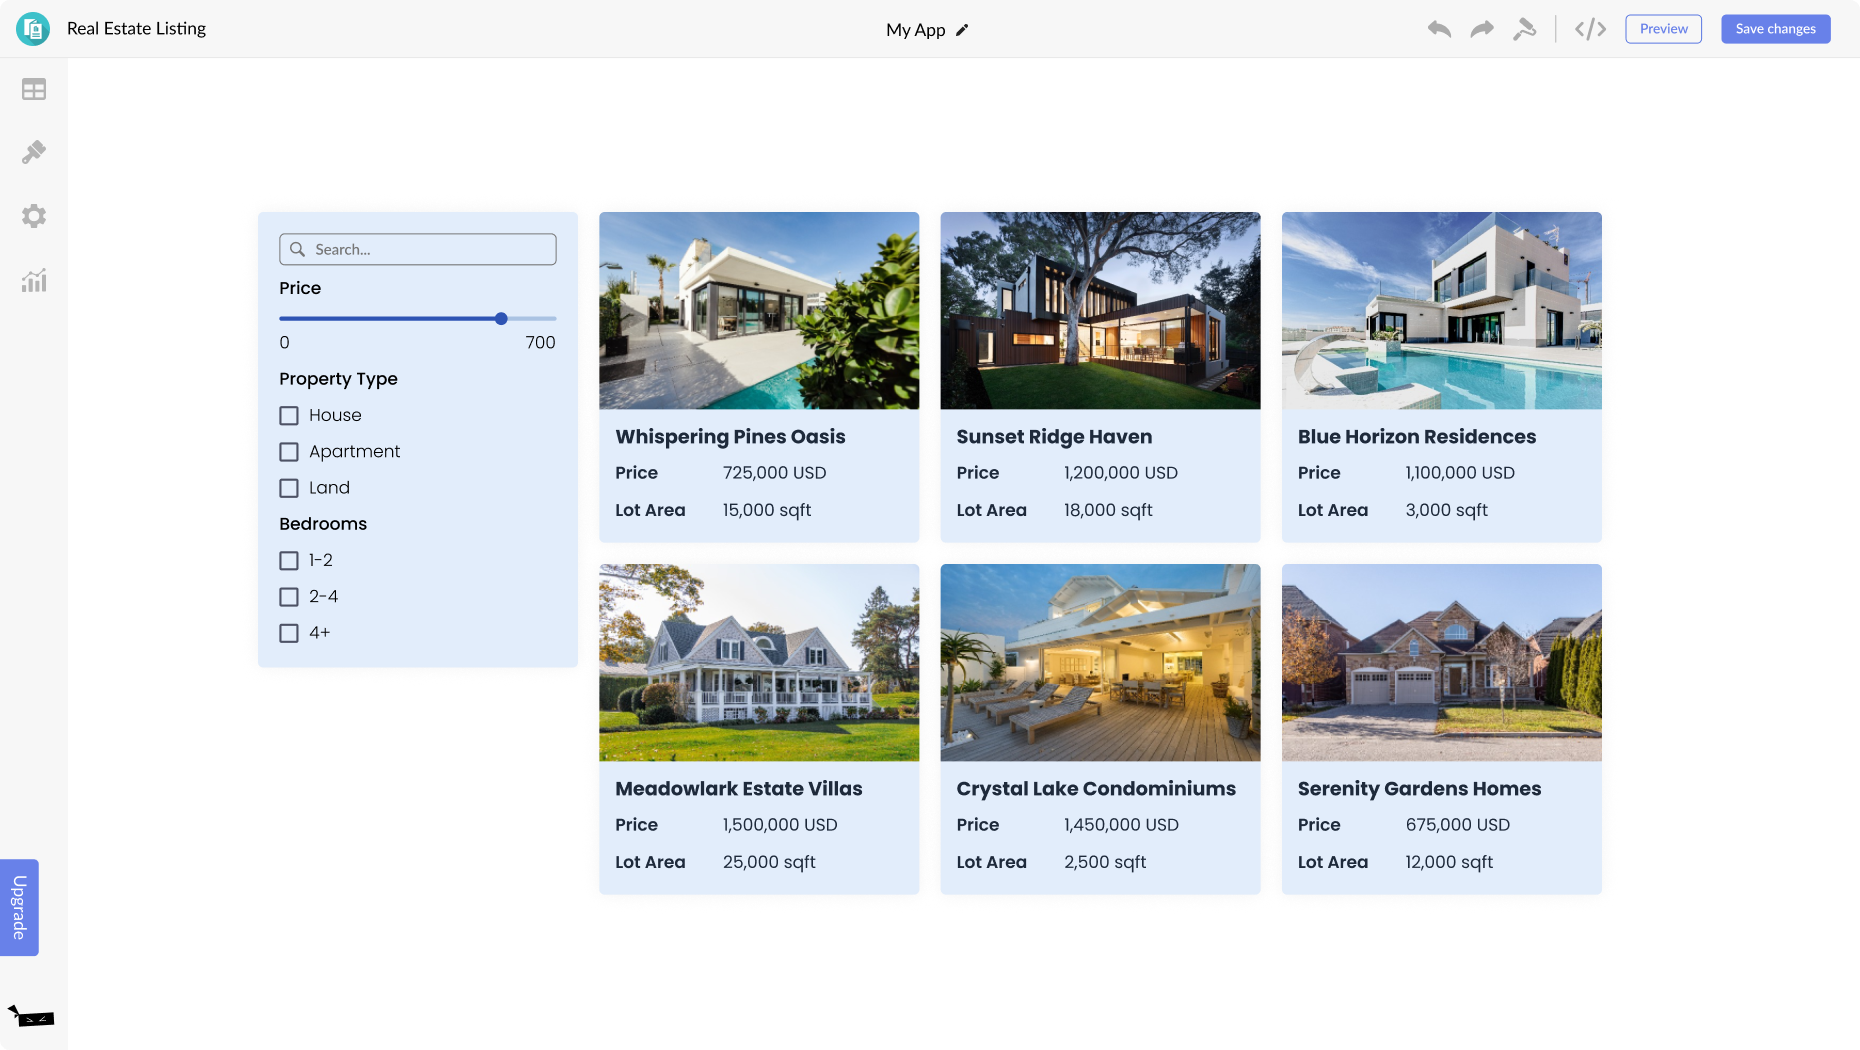 Real Estate Listings for PageXL